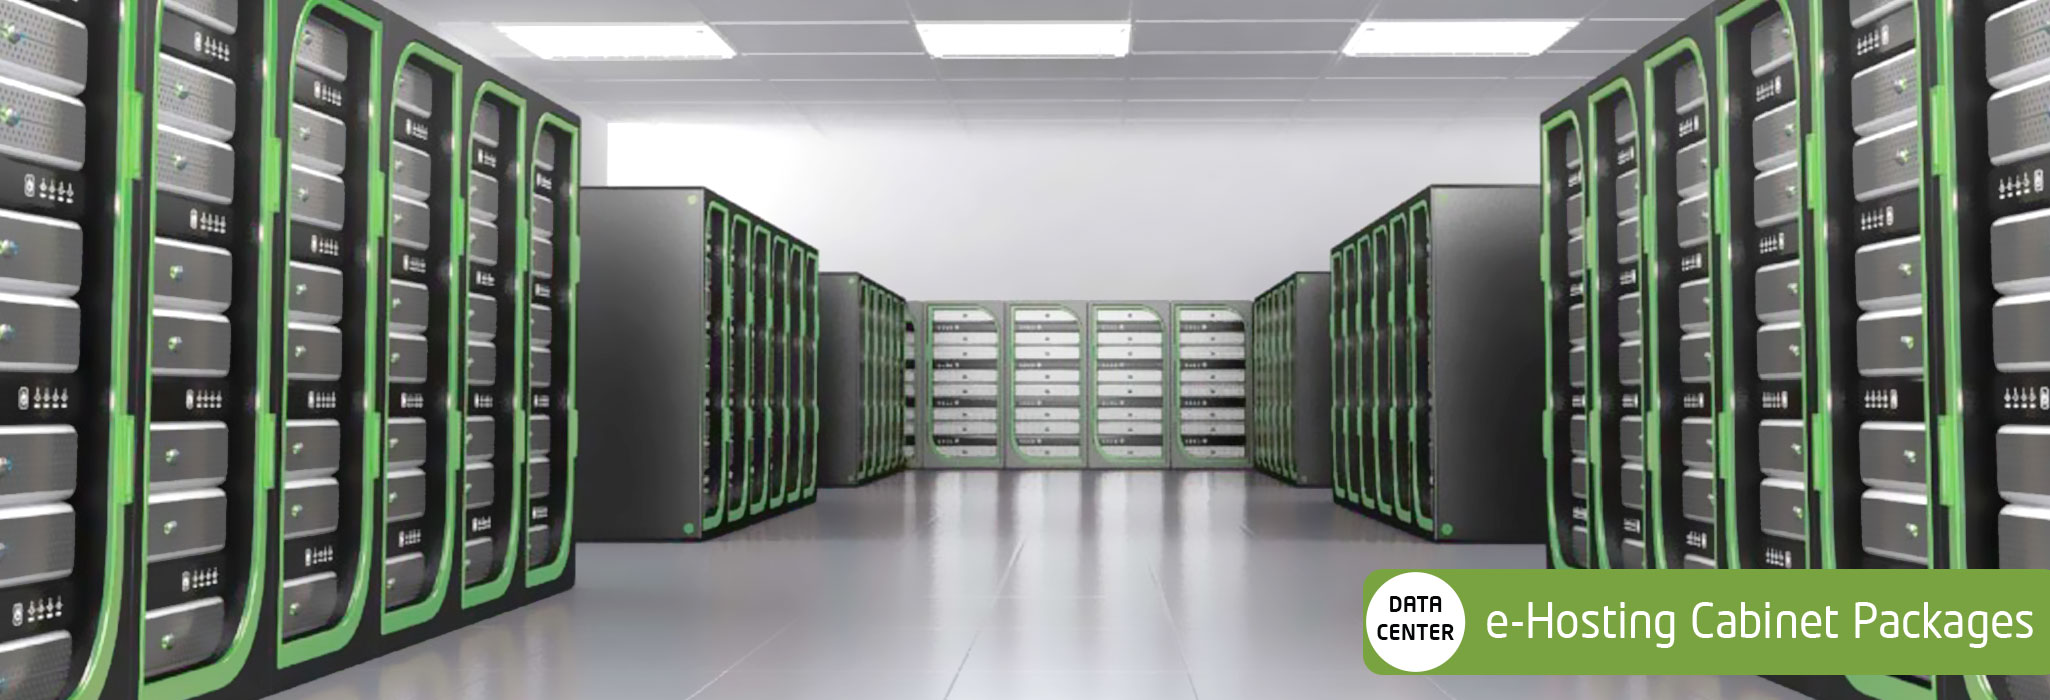 Etisalat eHosting Cabinet Packages